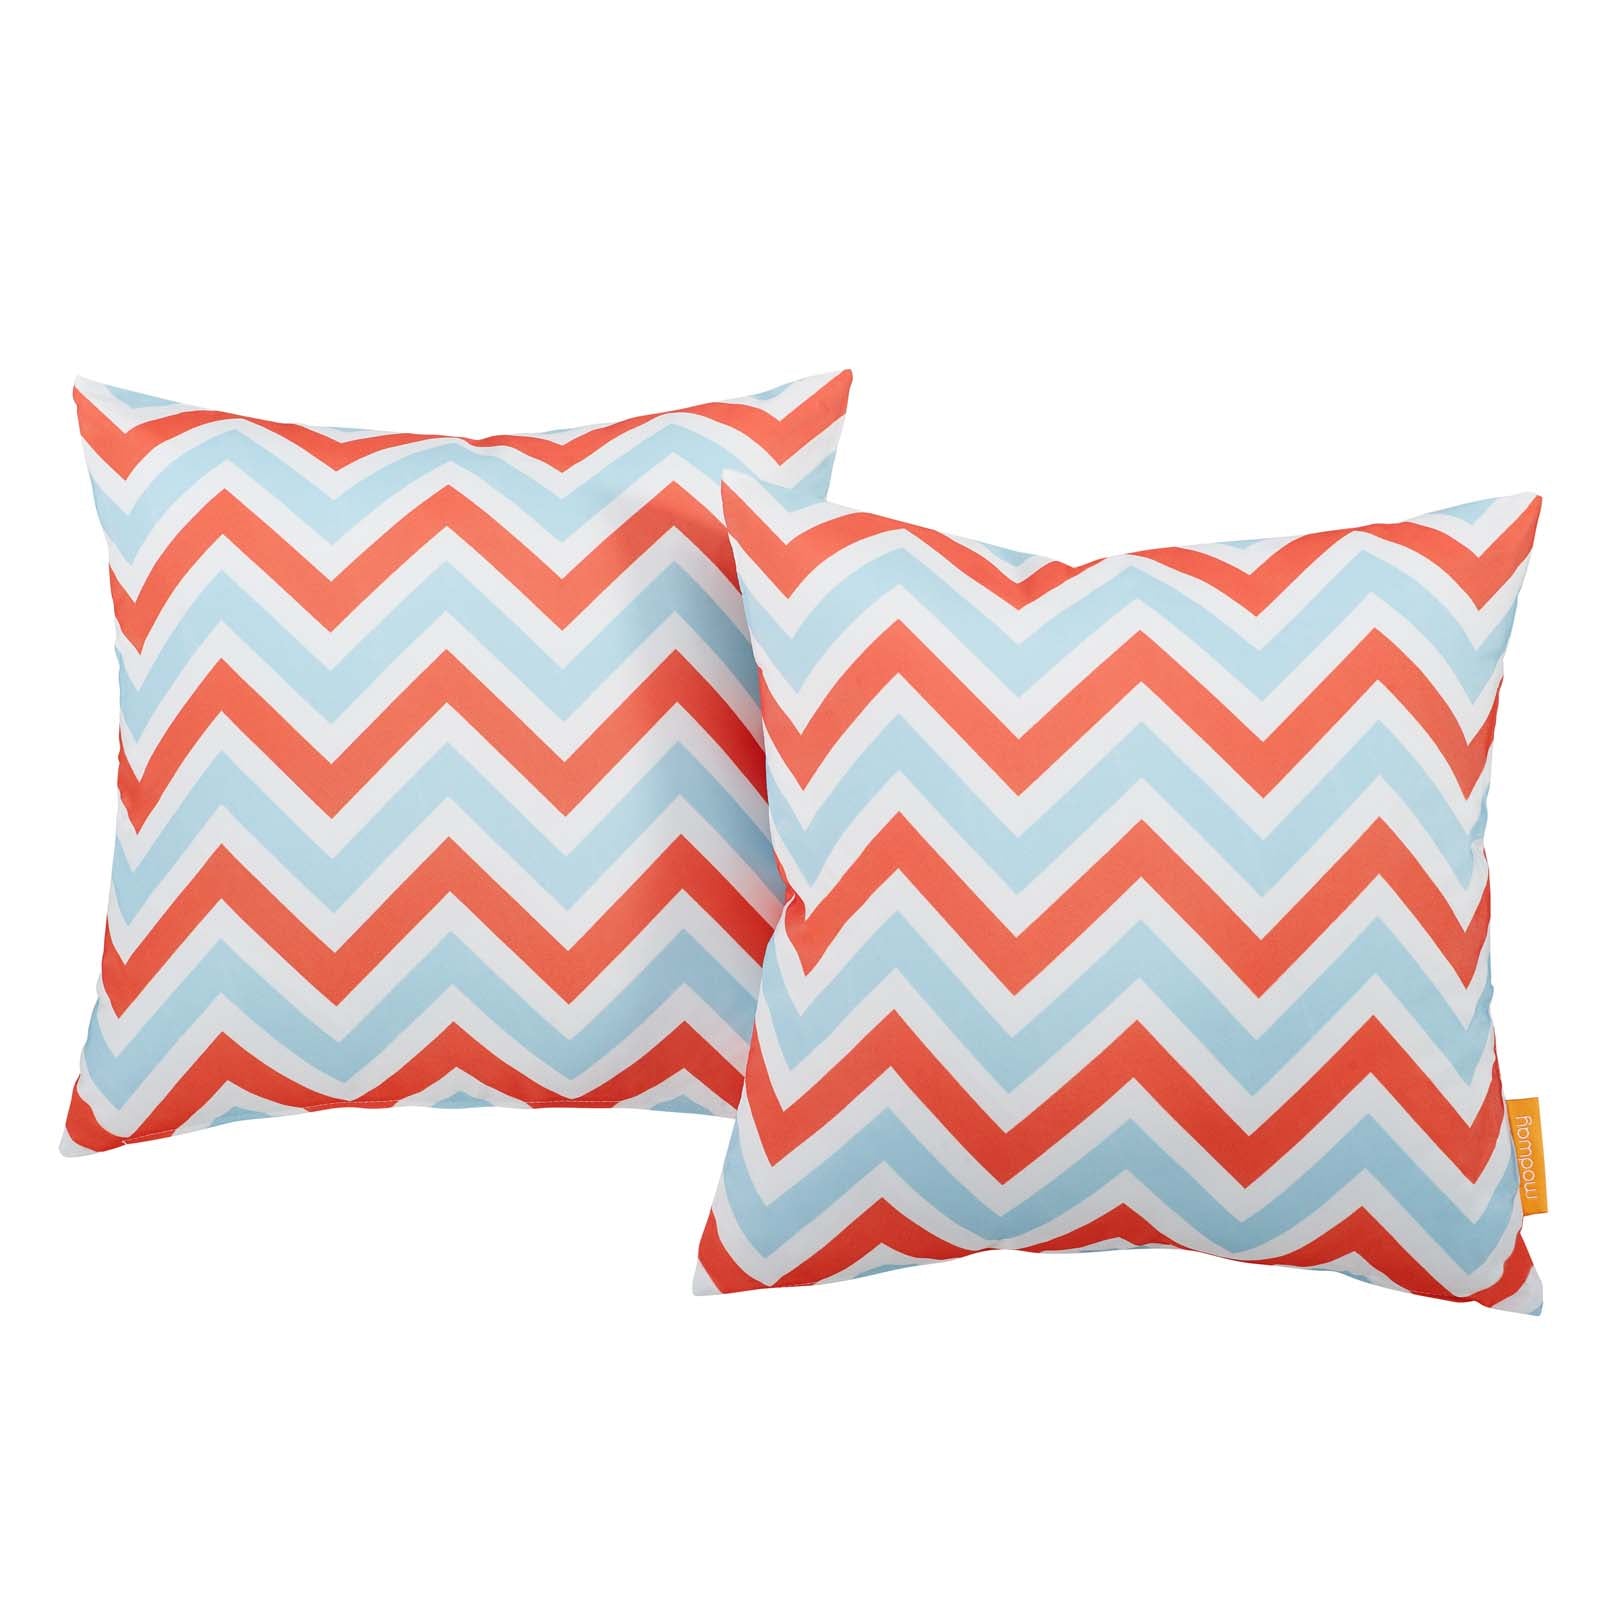 Modway Outdoor Pillows & Cushions - Modway Two Piece Outdoor Patio Pillow Set Zig Zag